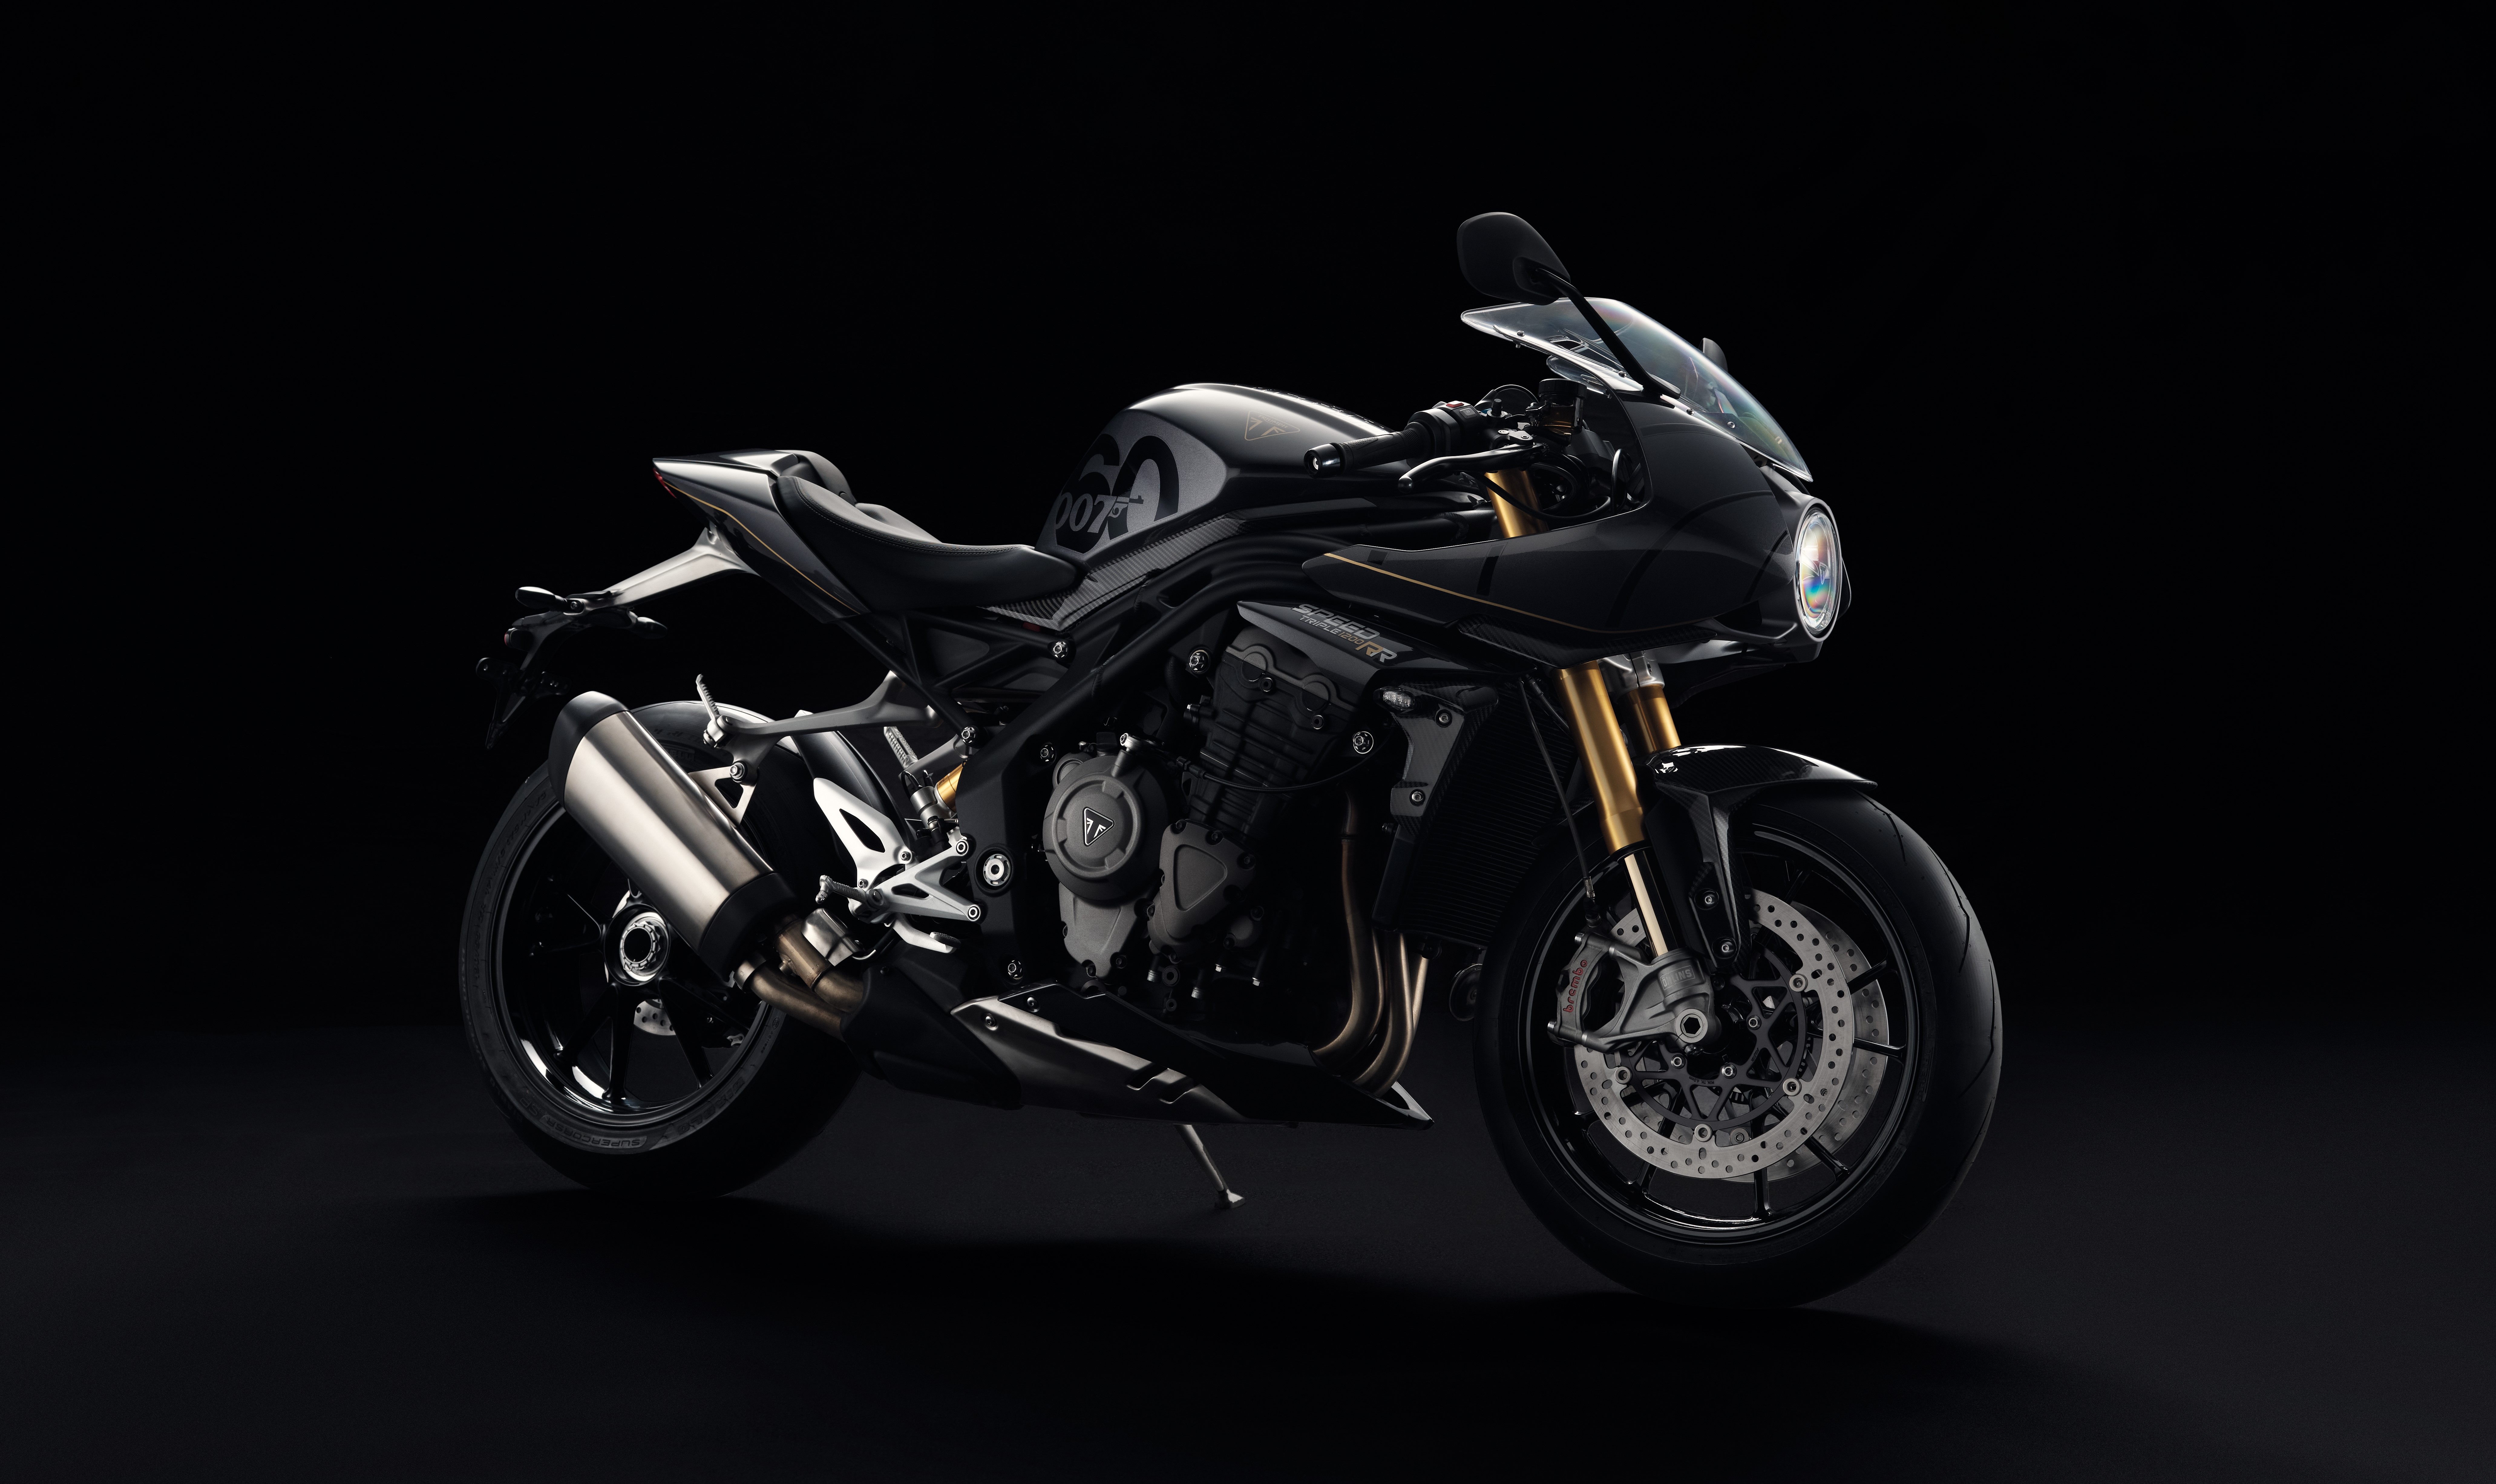 HD desktop wallpaper featuring the Triumph Speed Triple 1200 RR Bond Edition motorcycle against a dark background.